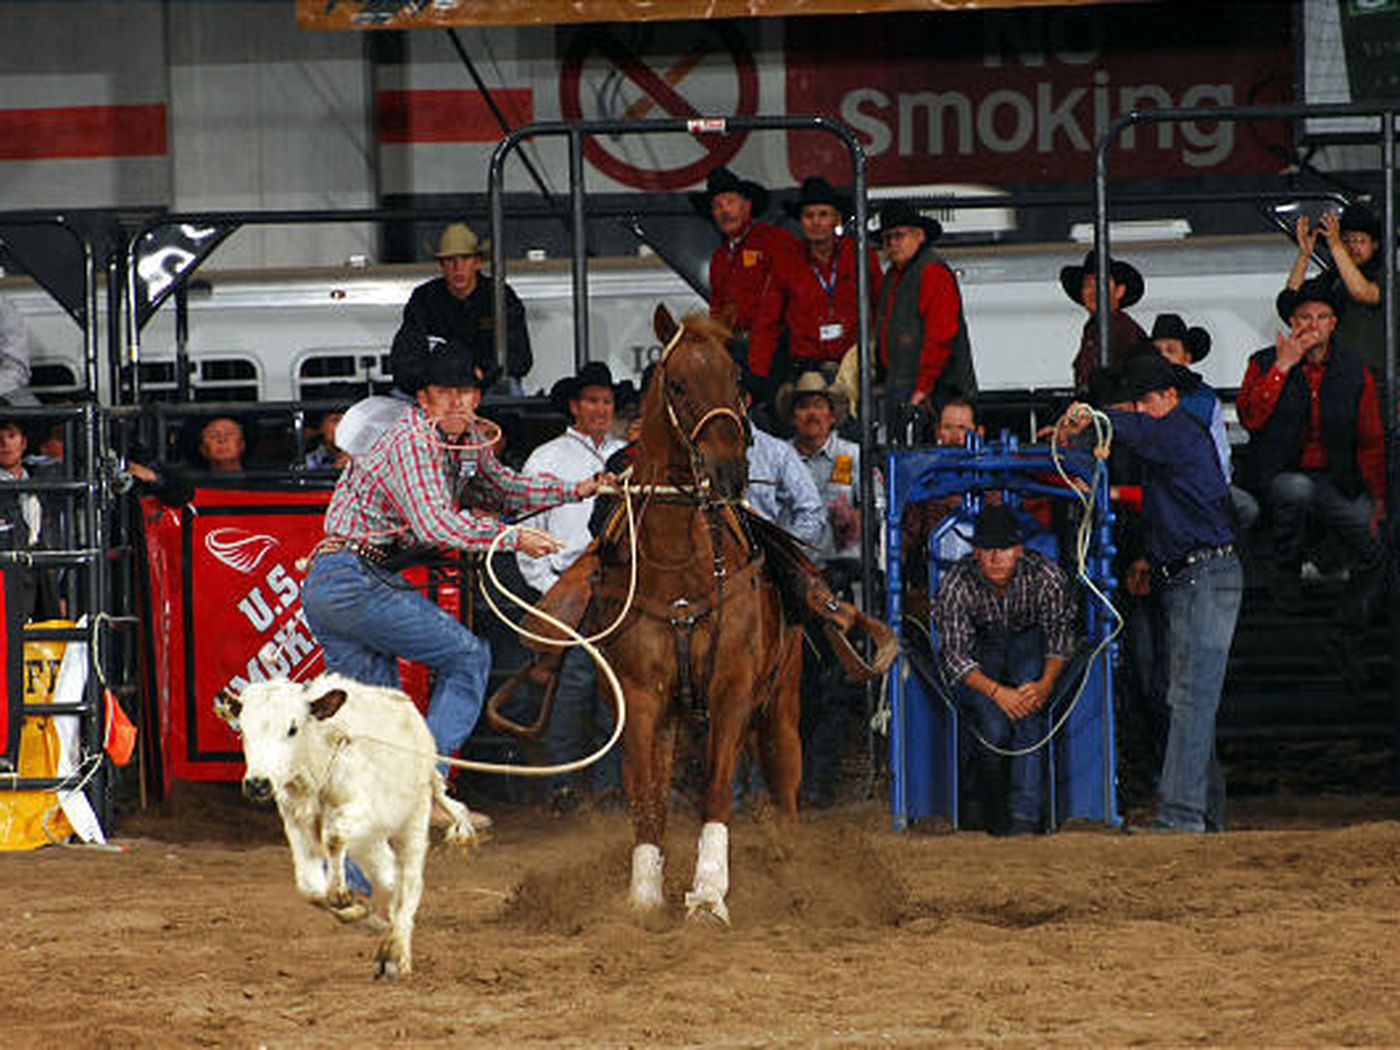 Rodeo star with integrity